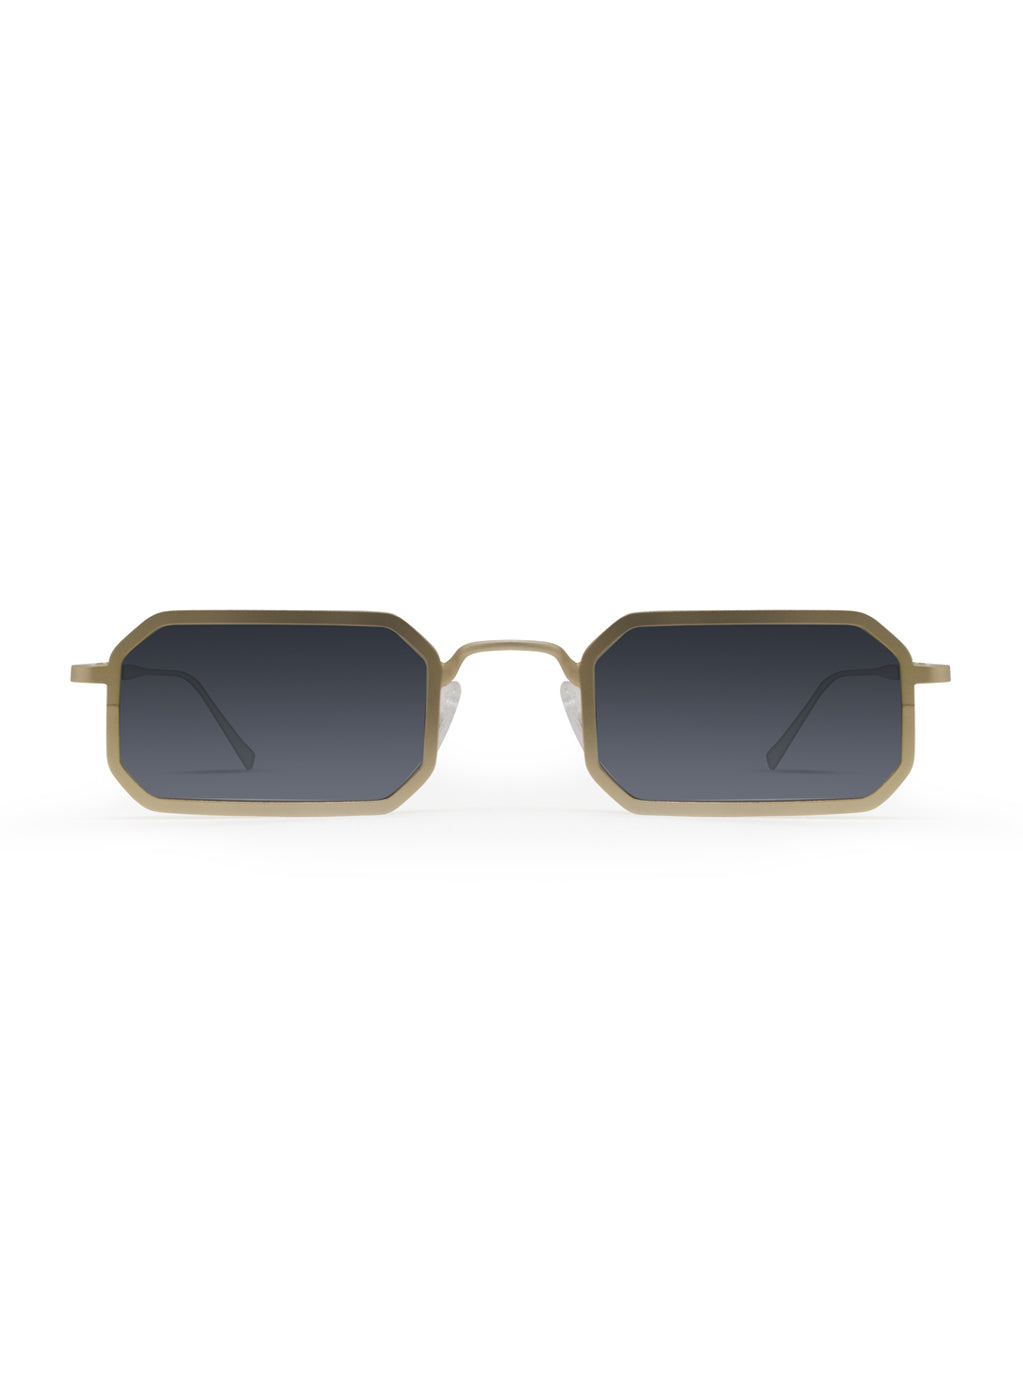 Gamma 2.0 Gold with Black Lenses